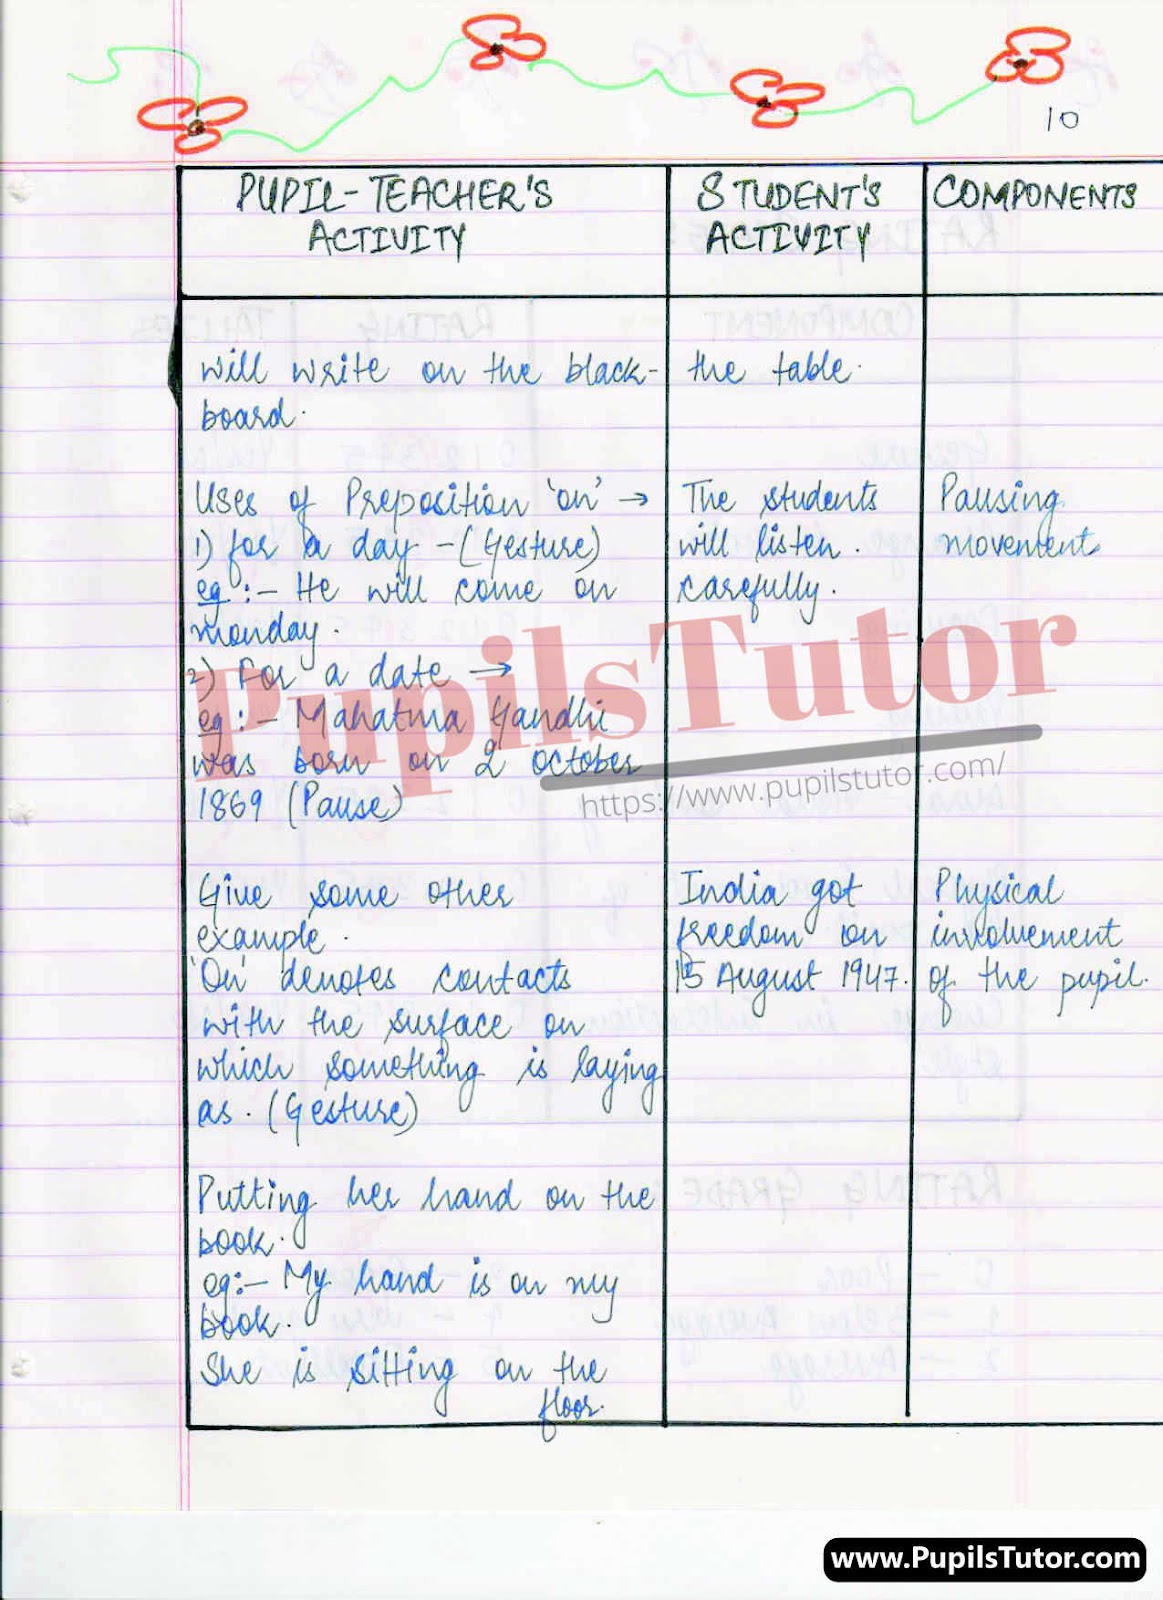 English Grammar Lesson Plan On Uses Of Preposition For Class/Grade 4, 5 And 6 For CBSE NCERT School And College Teachers  – (Page And Image Number 3) – www.pupilstutor.com